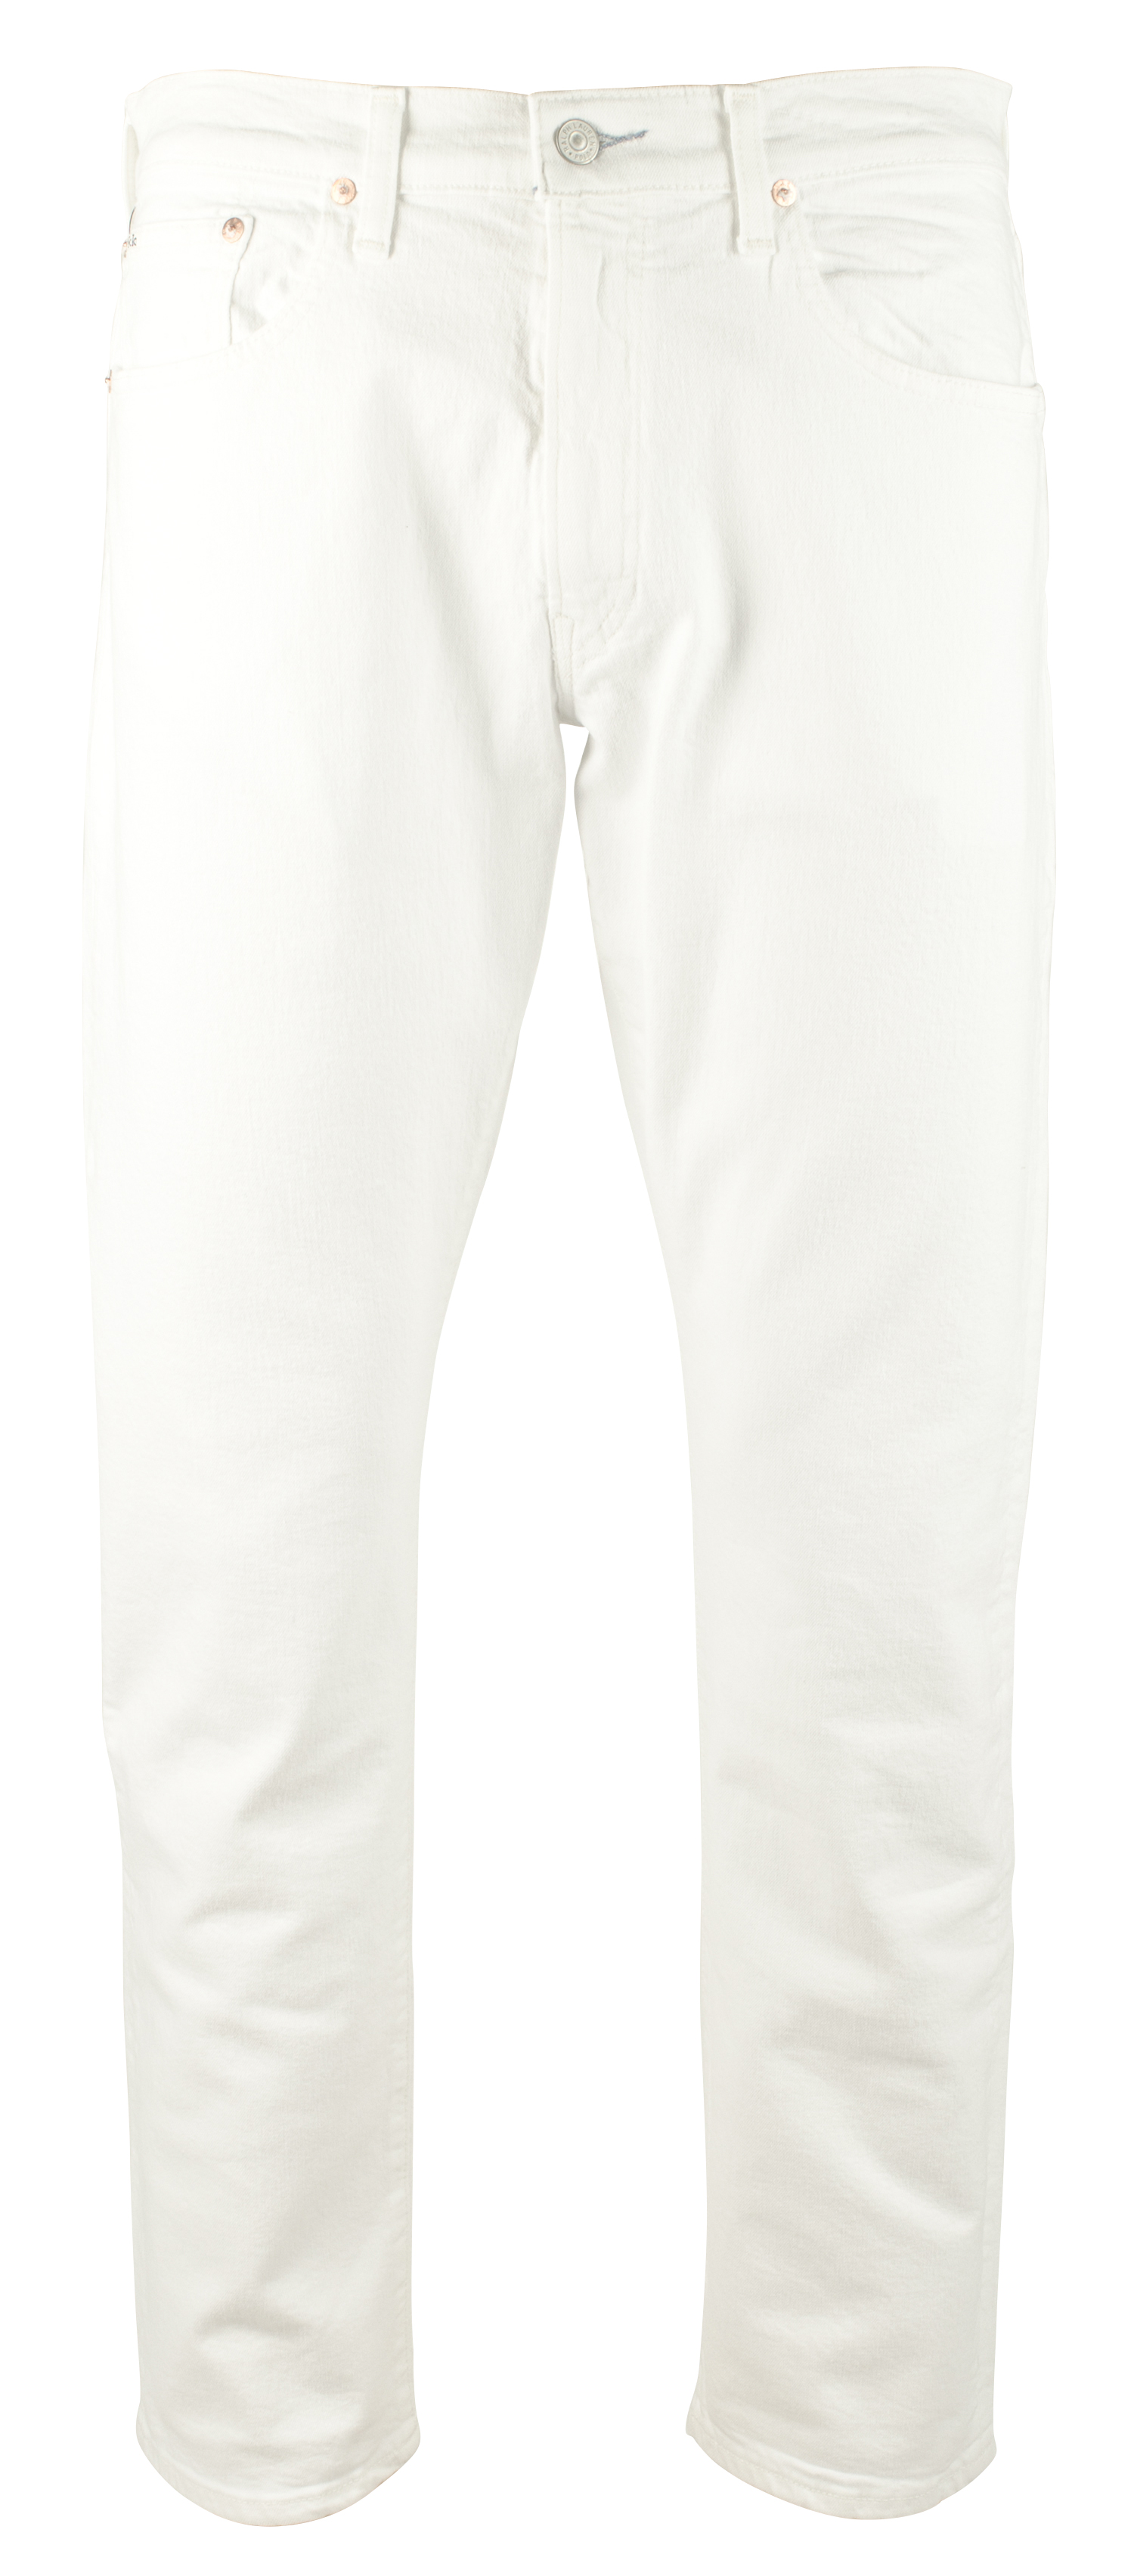 Men's Hampton Relaxed Straight Jeans-HW-32WX32L - image 1 of 3